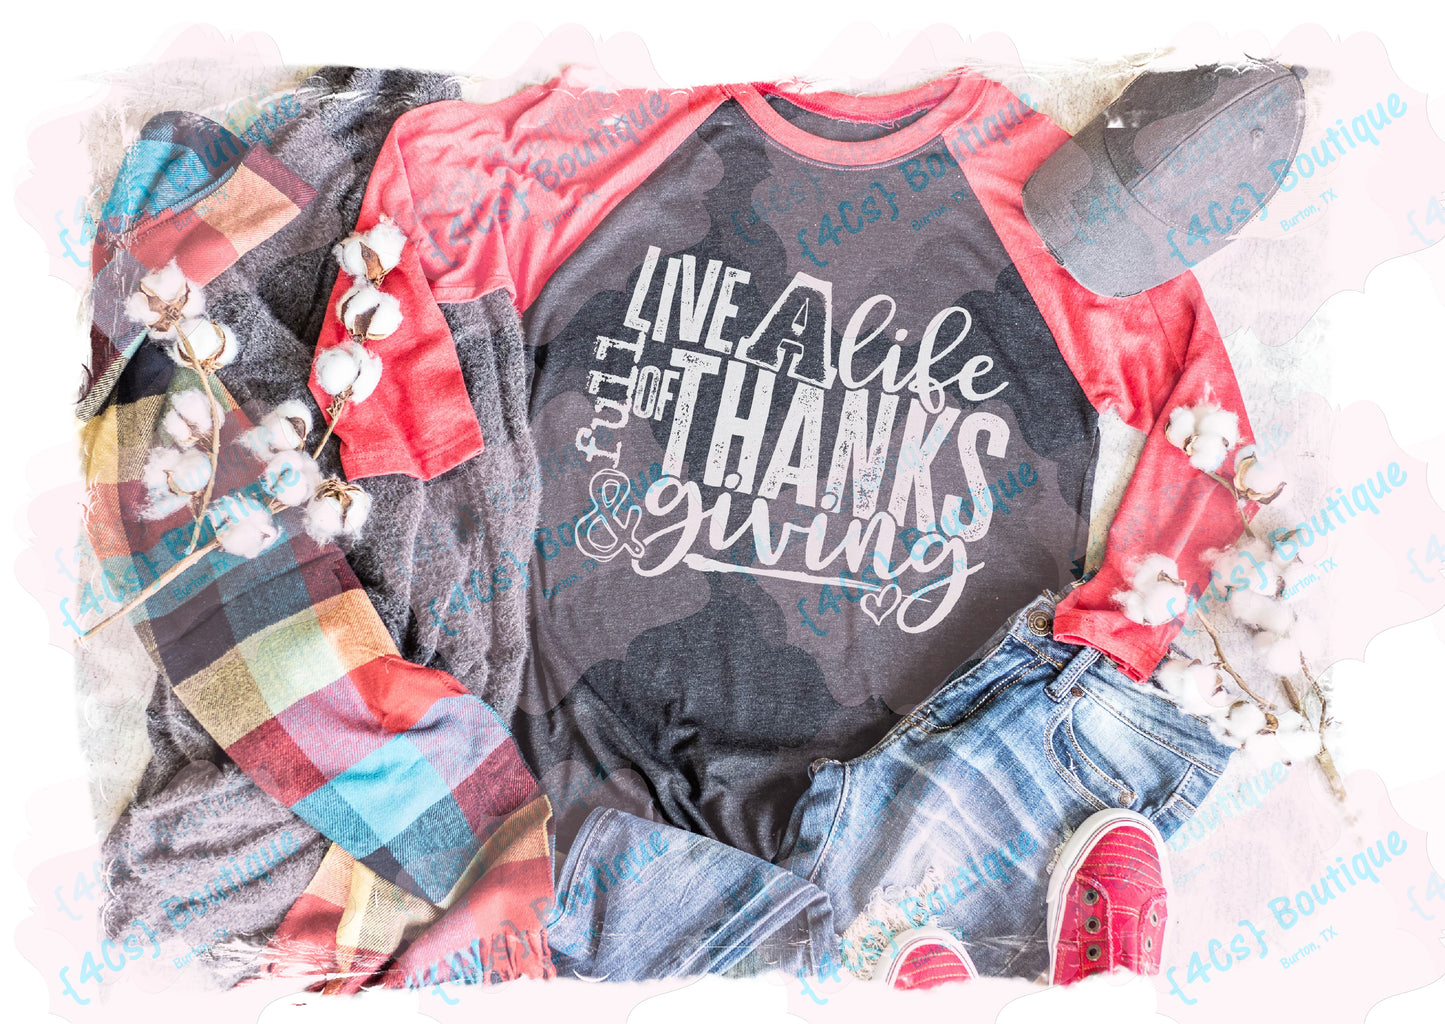 Live A Life Full Of Thanks & Giving Shirt